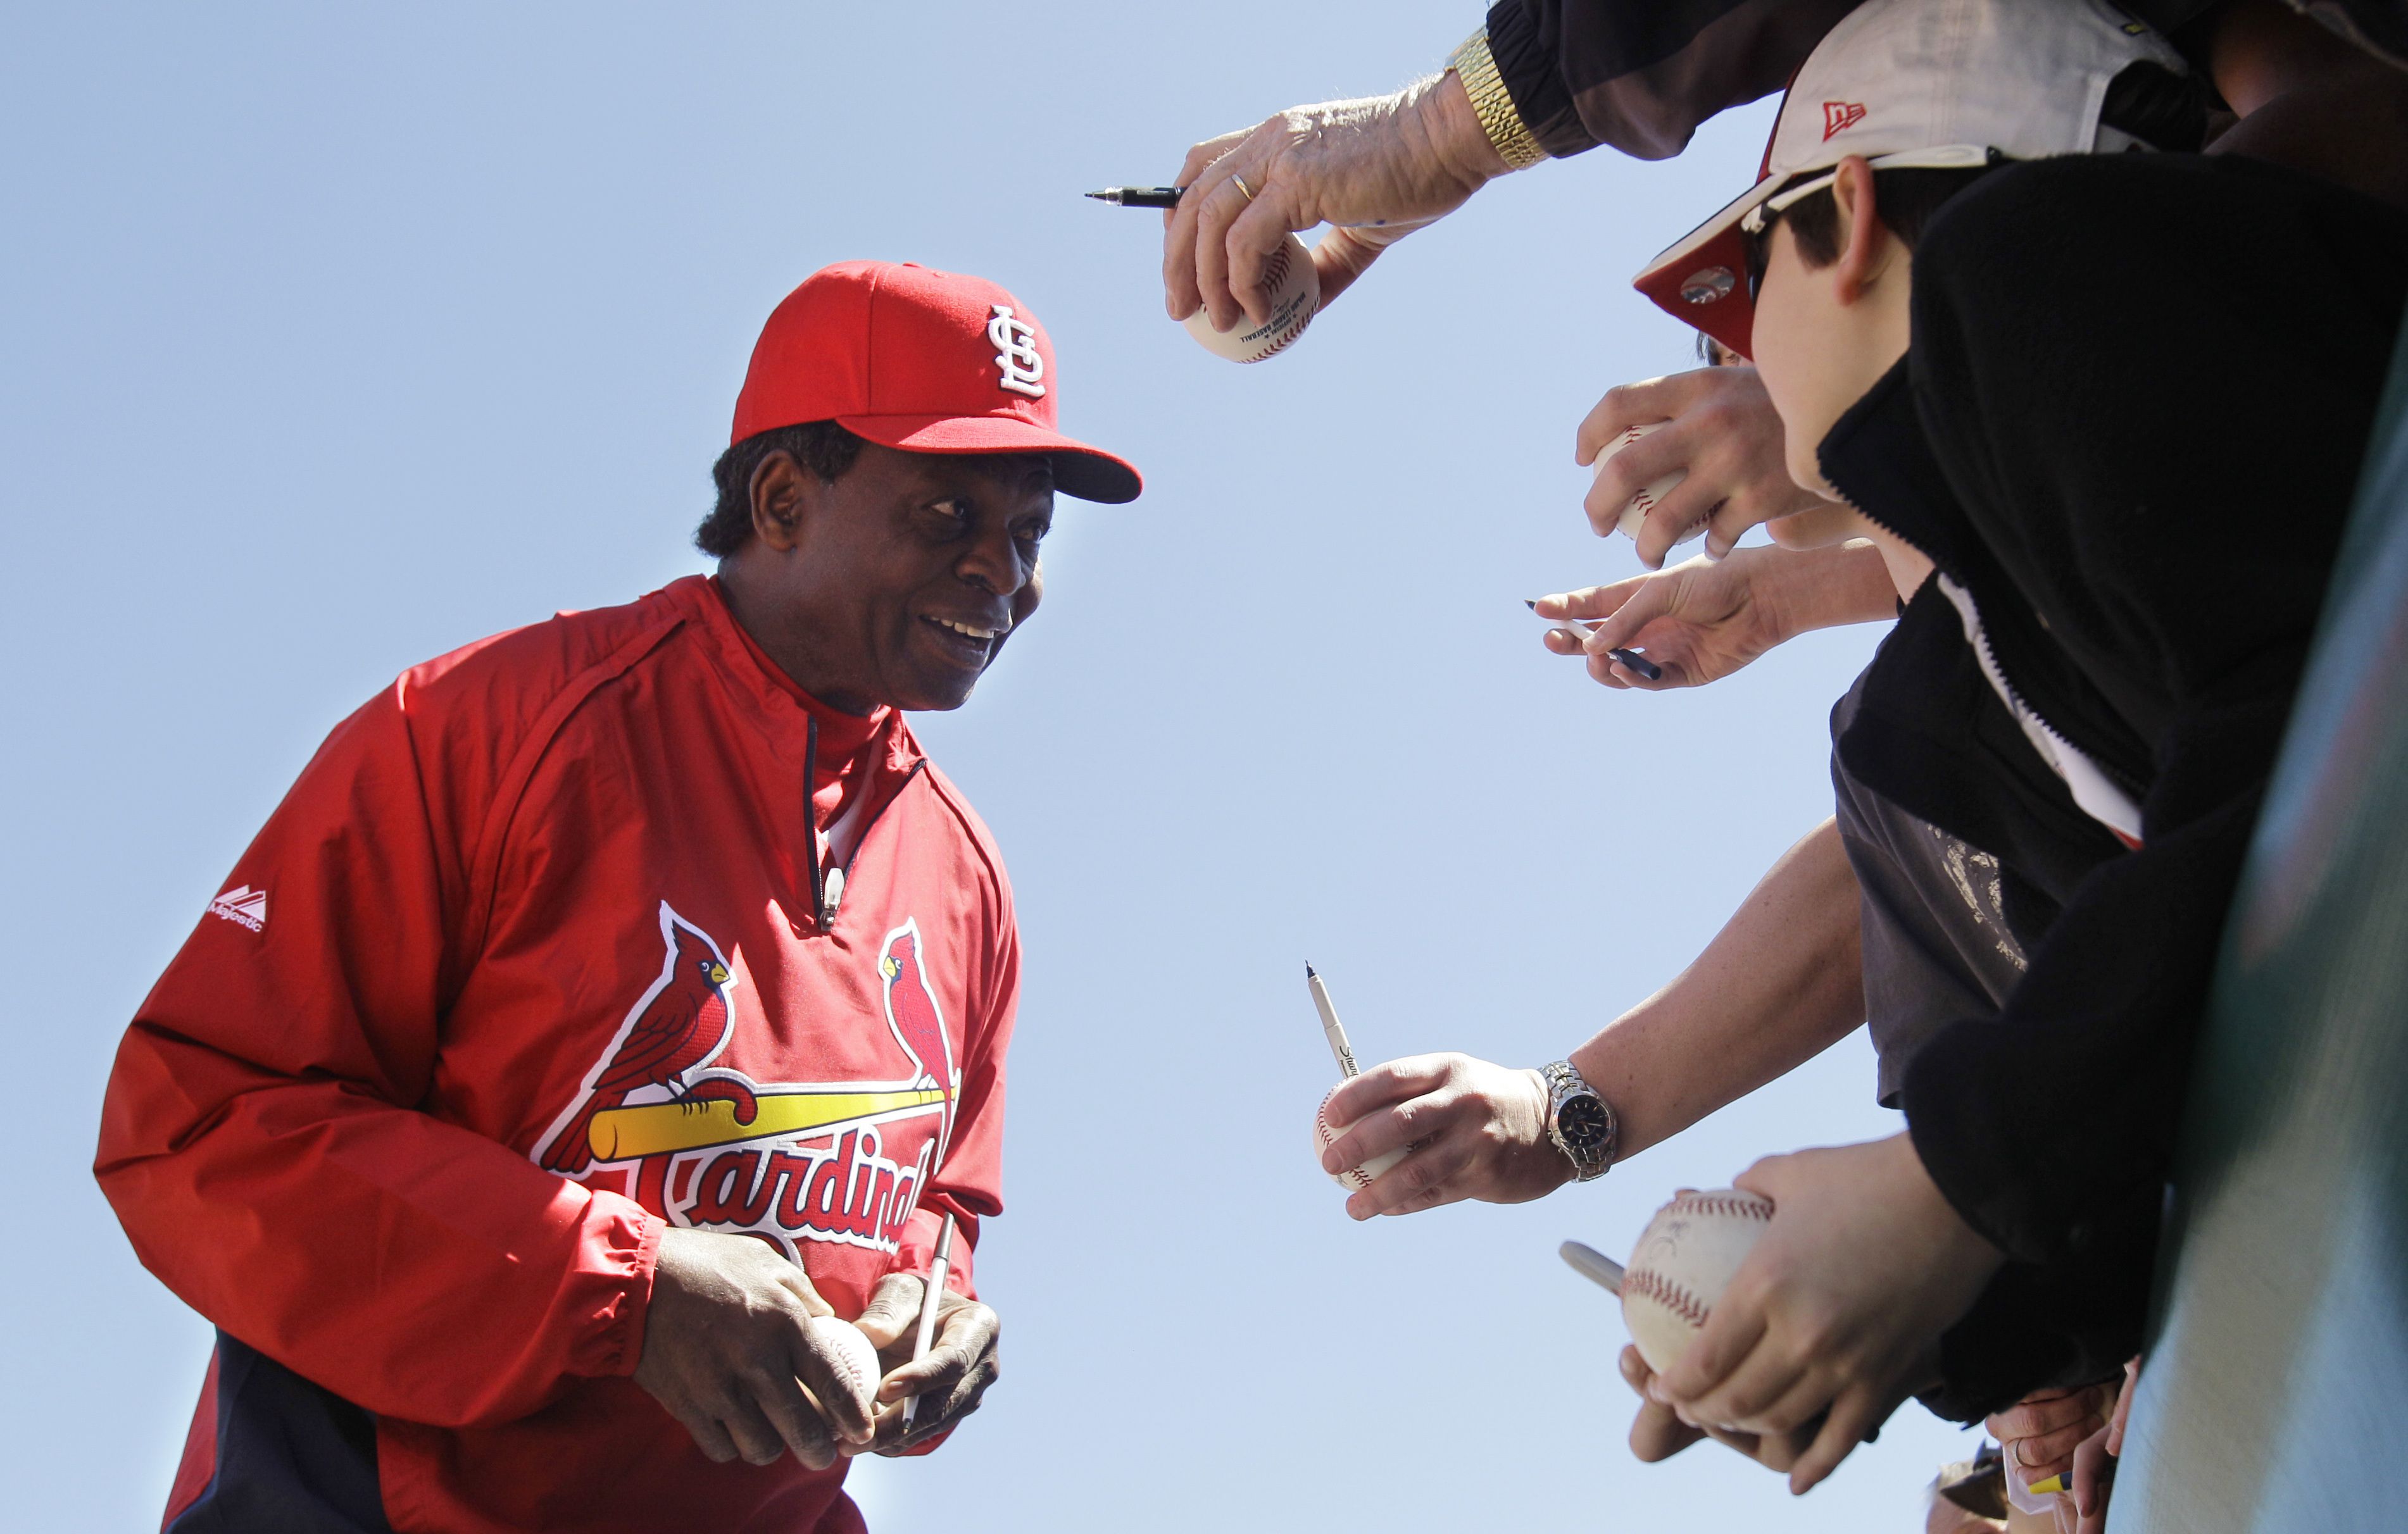 Hall of Fame outfielder, speedster Lou Brock dies at age 81